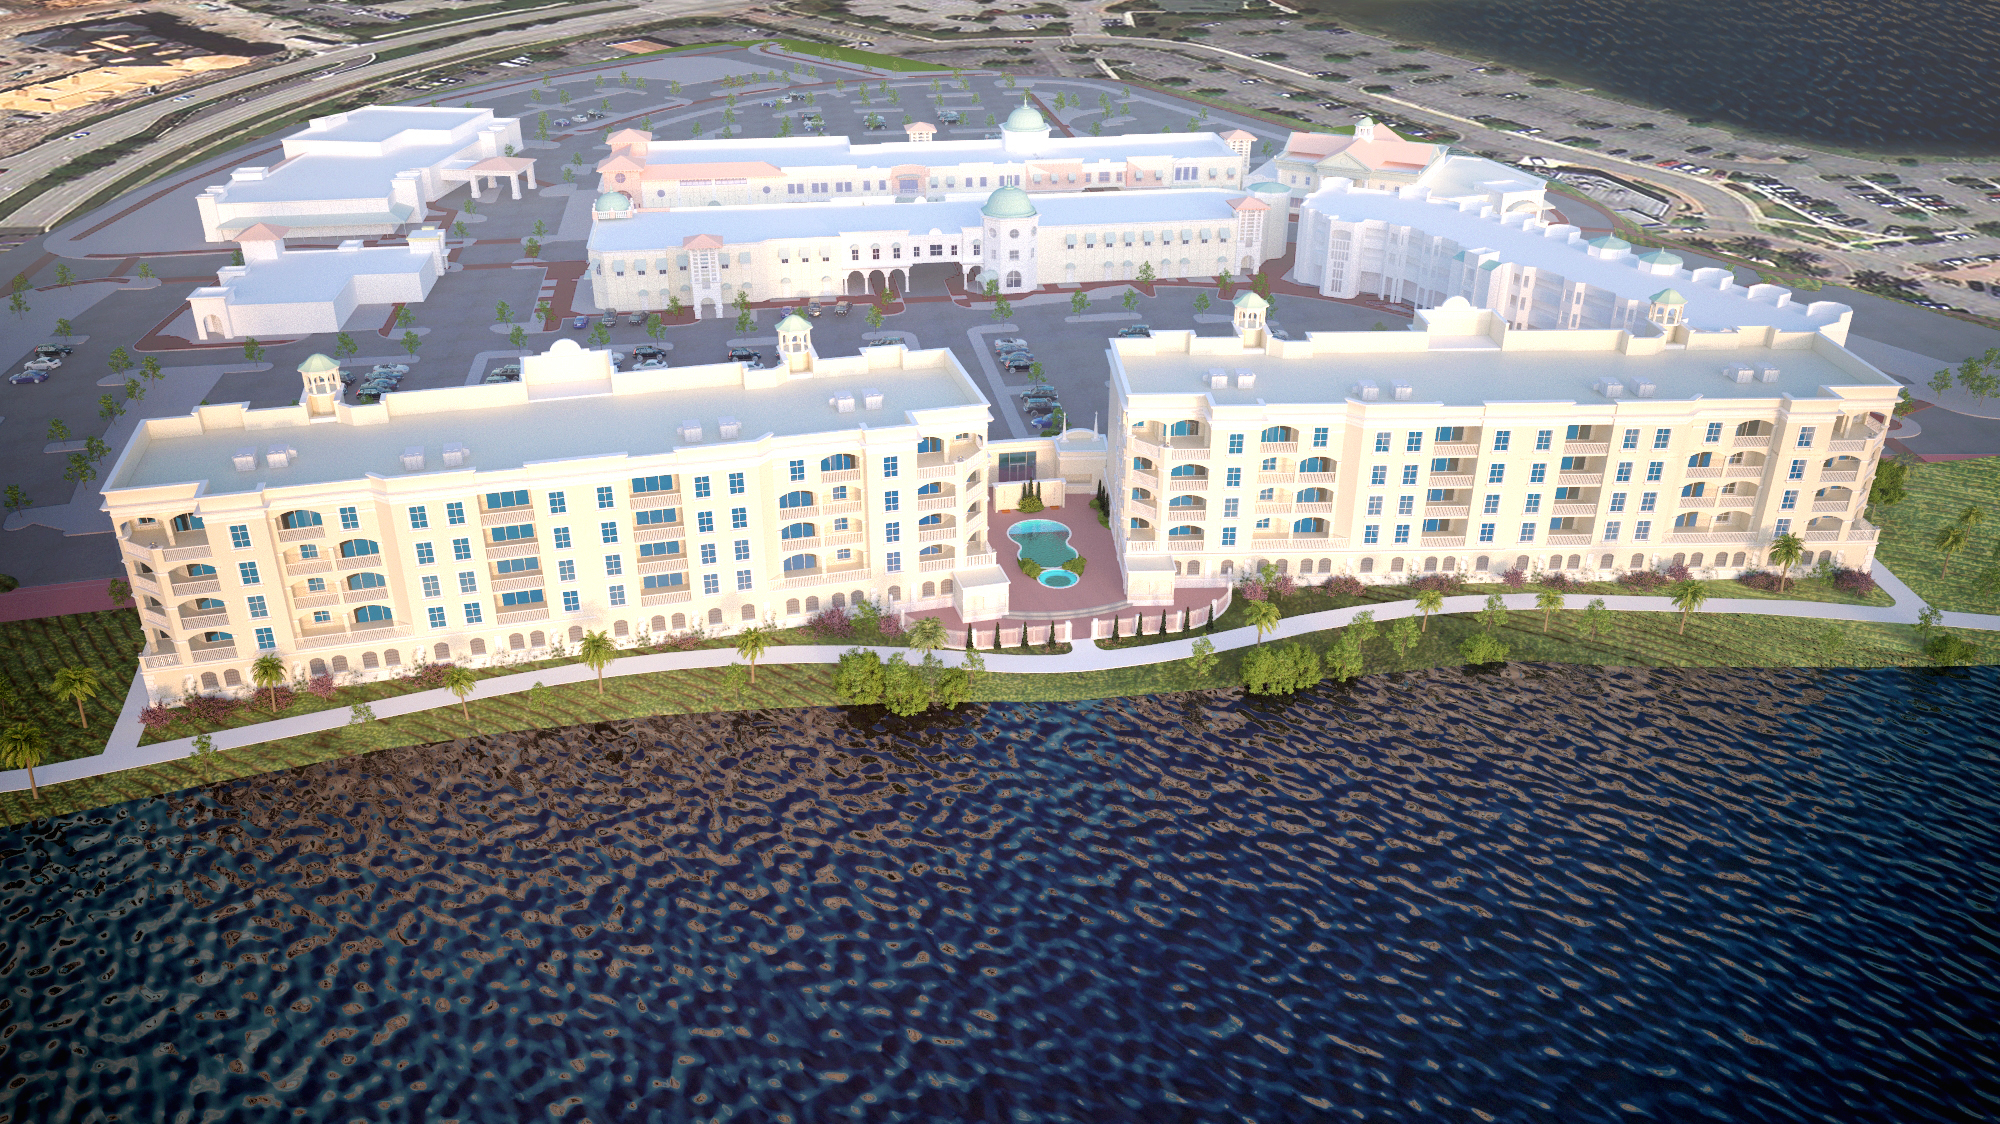 A rendering shows the two five-story buildings that make up The Lakeshore condominium project at the bottom with existing Lakewood Main Street buildings in the background. The project is being built on the west shore of Lake Uihlein.